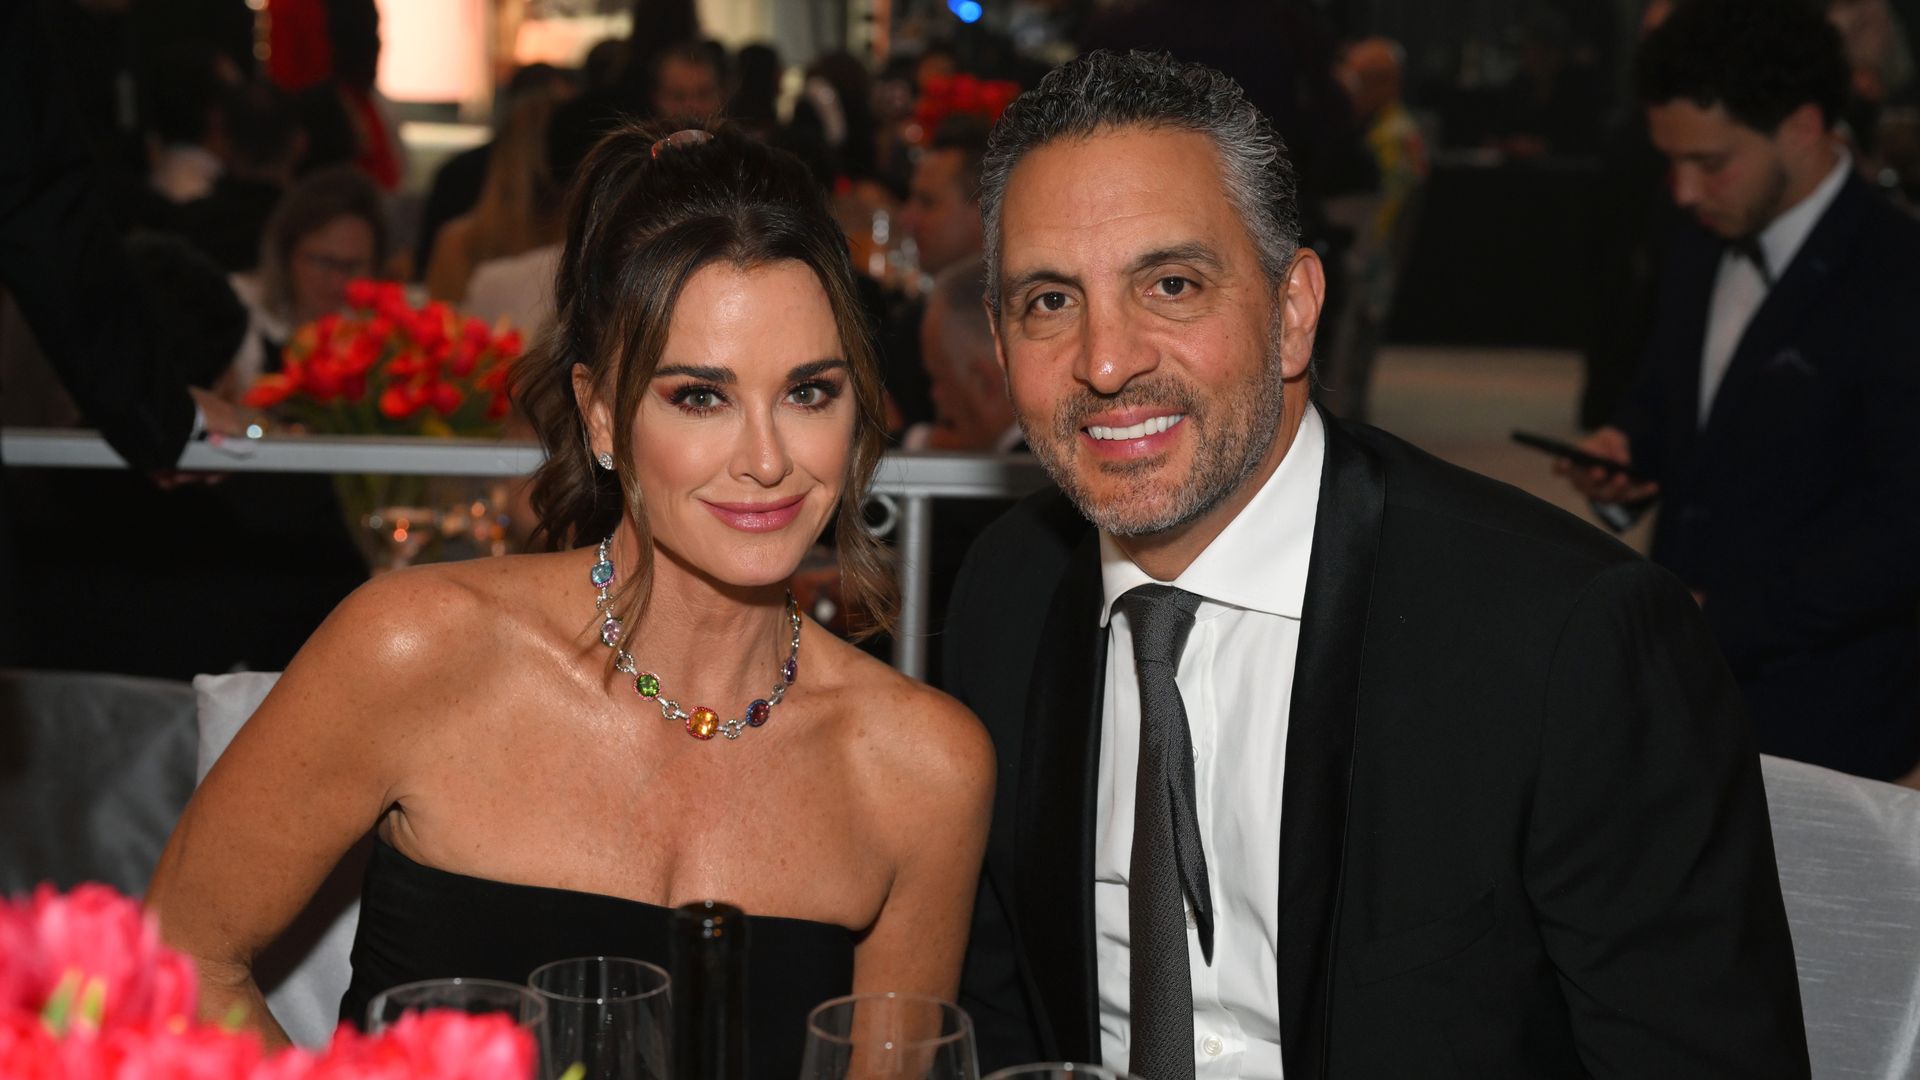 Kyle Richards and Mauricio Umansky attend the Elton John AIDS Foundation's 31st Annual Academy Awards Viewing Party on March 12, 2023 in West Hollywood, California